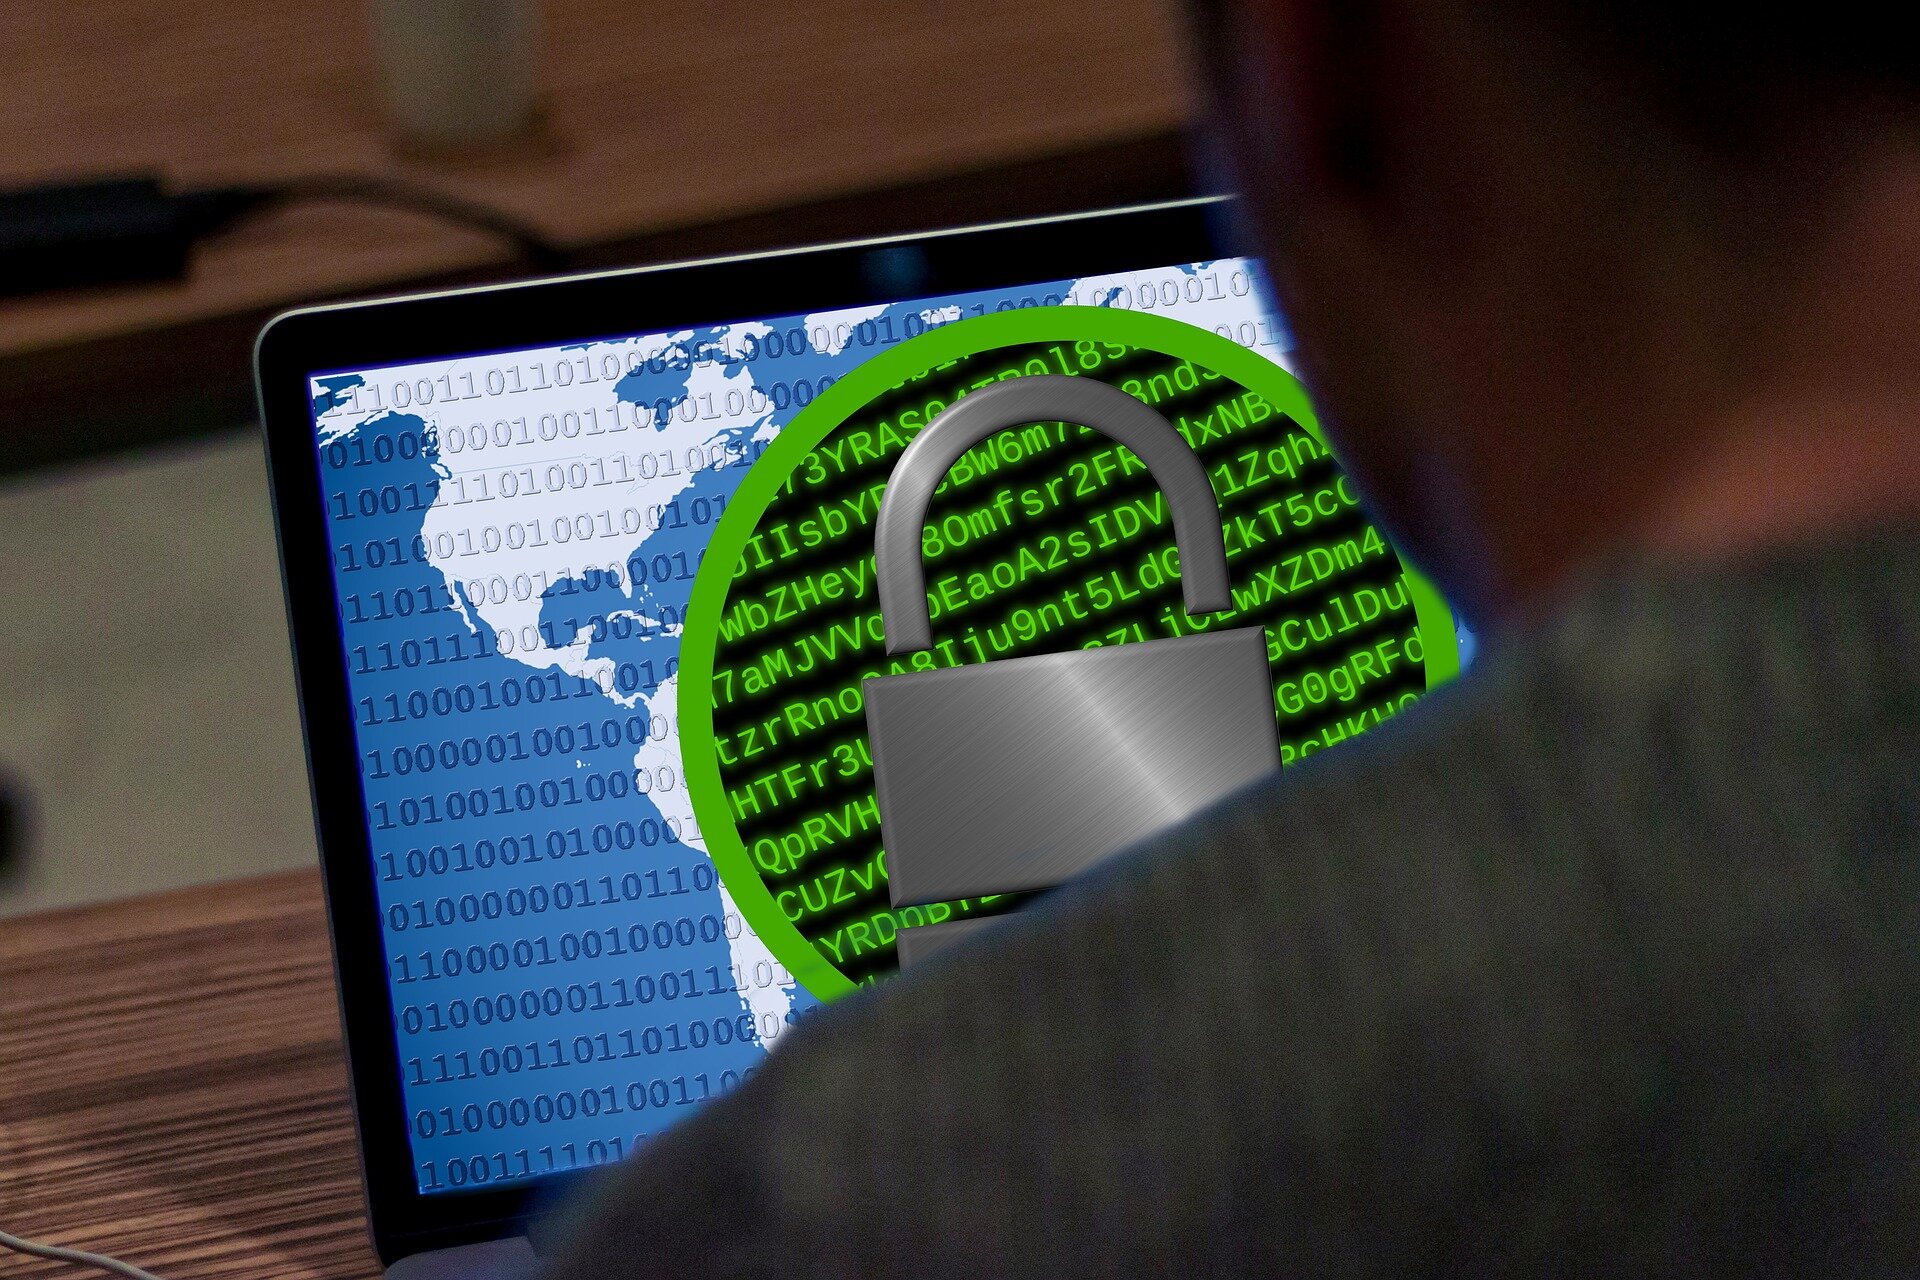 #Cyber attack causes chaos in Costa Rica government systems